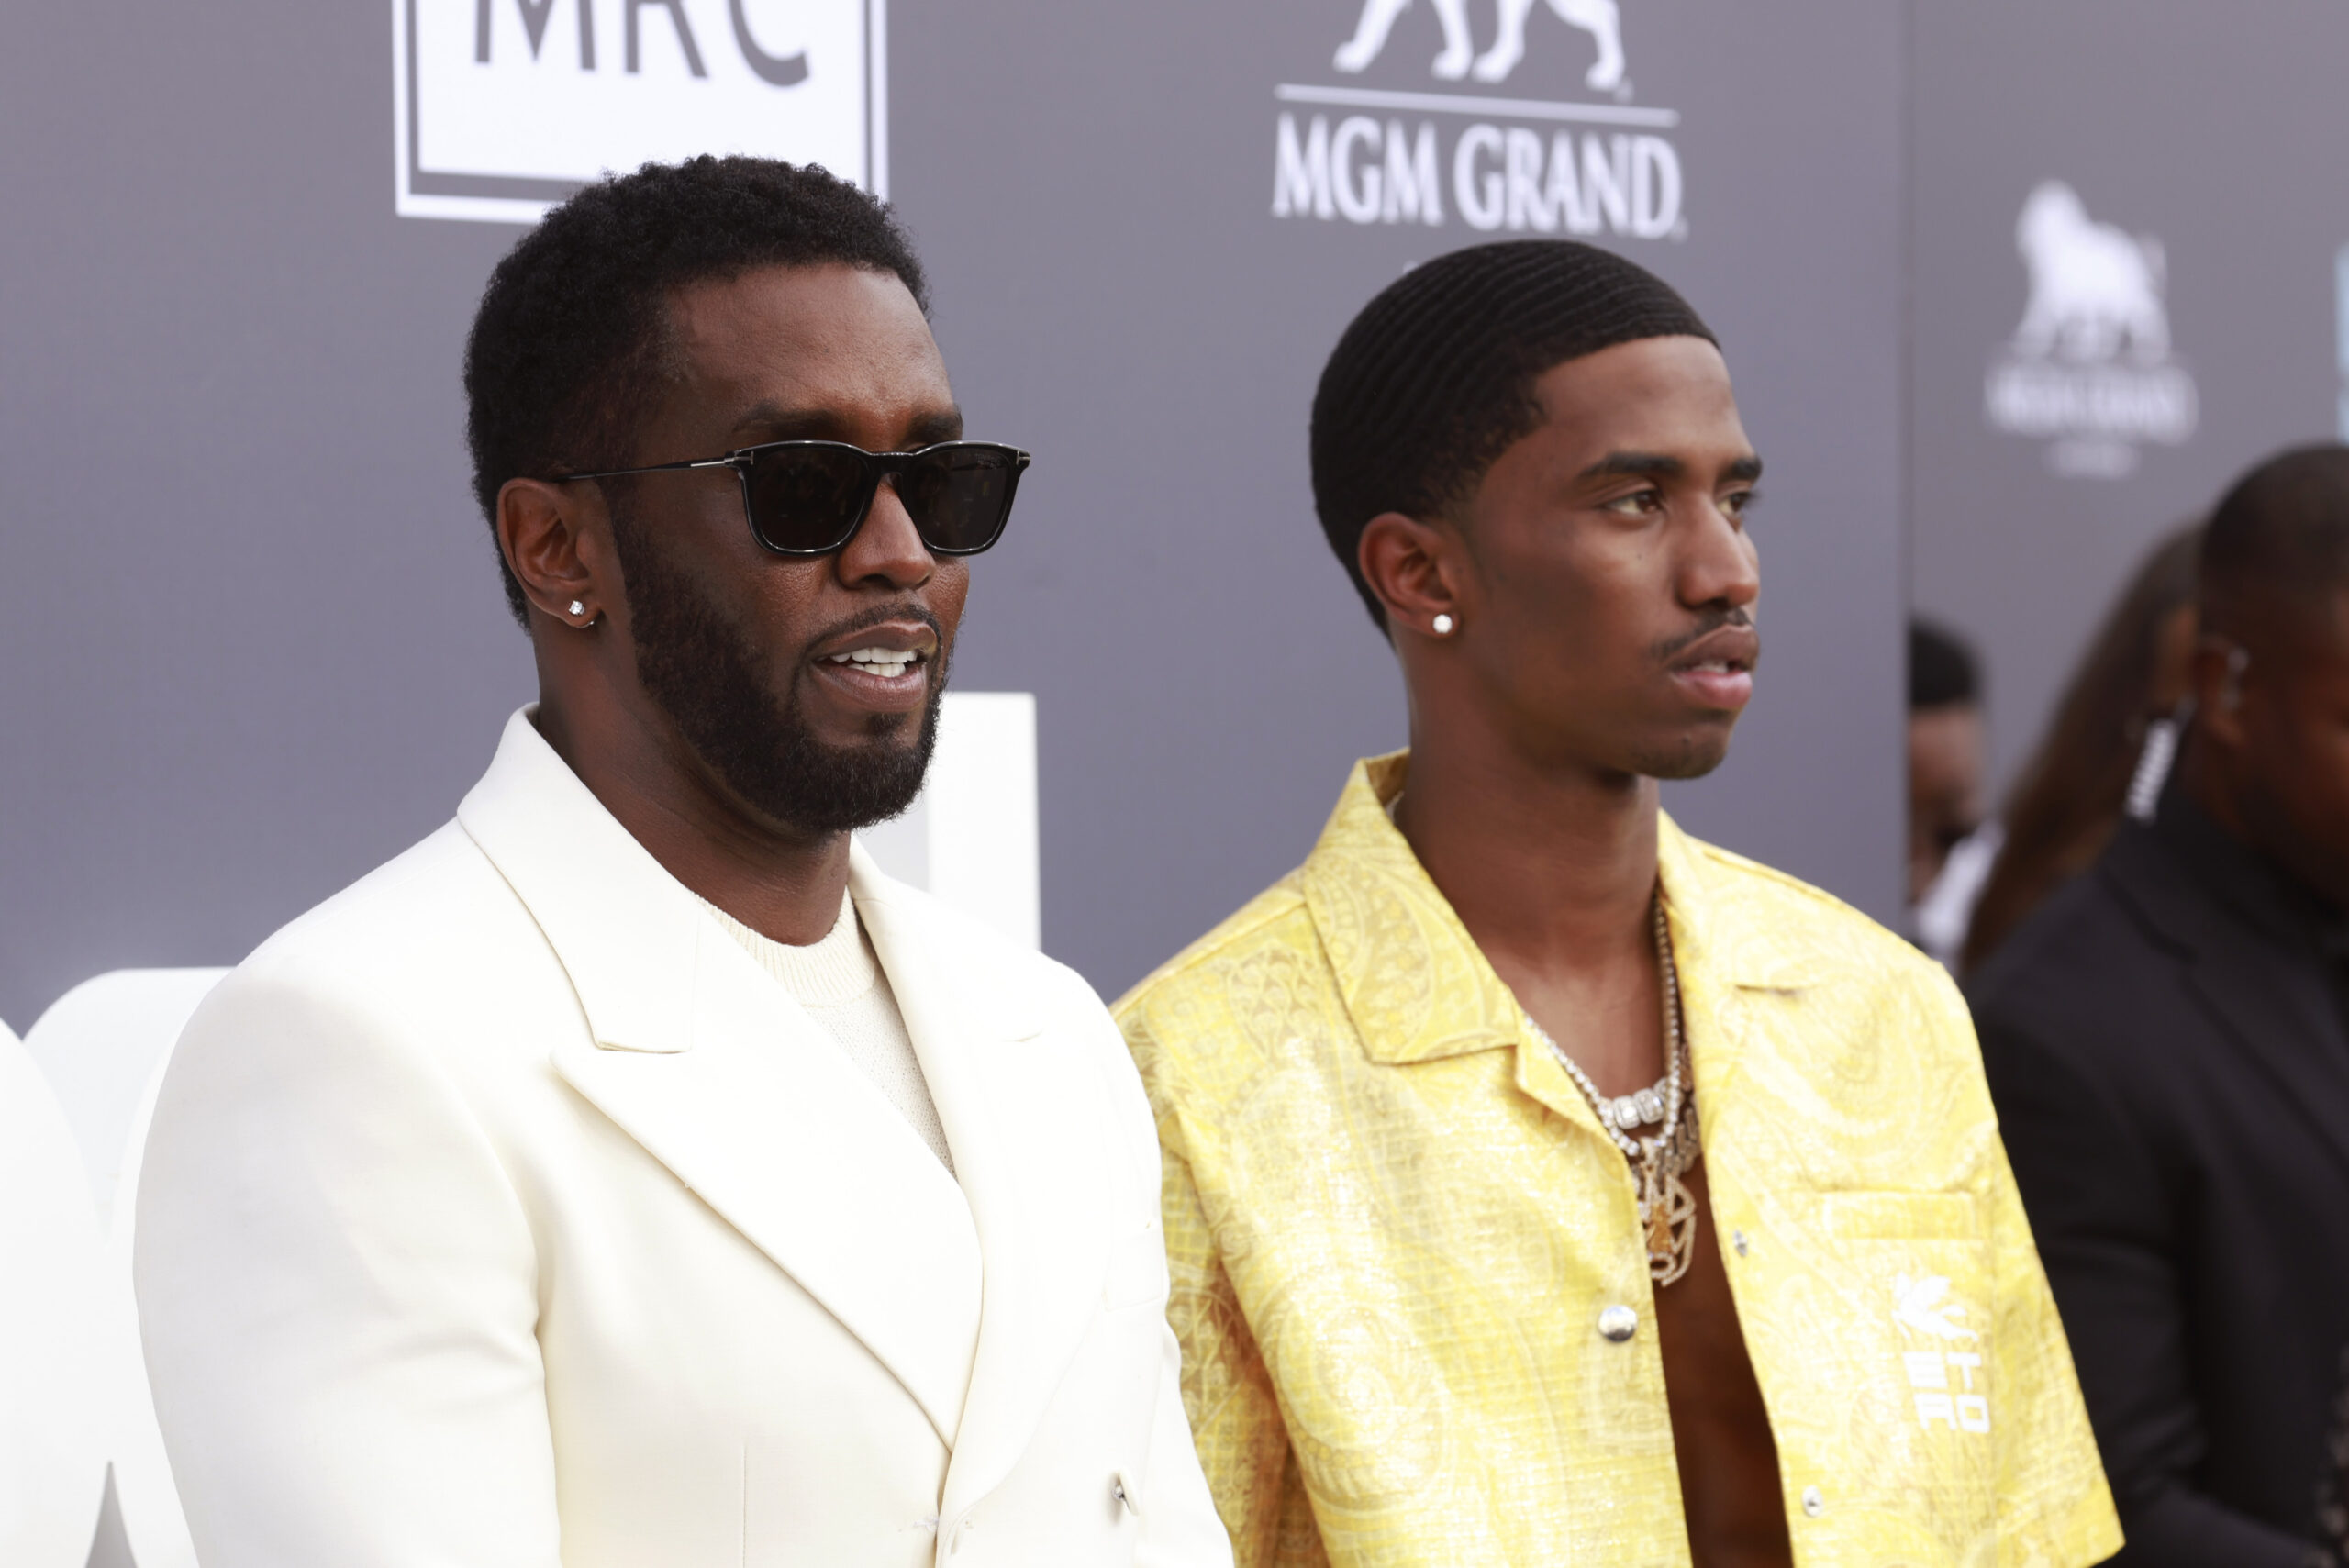 Christian Combs' Lawyer Releases Statement On Sexual Assault Allegations: "Manufactured Lies"